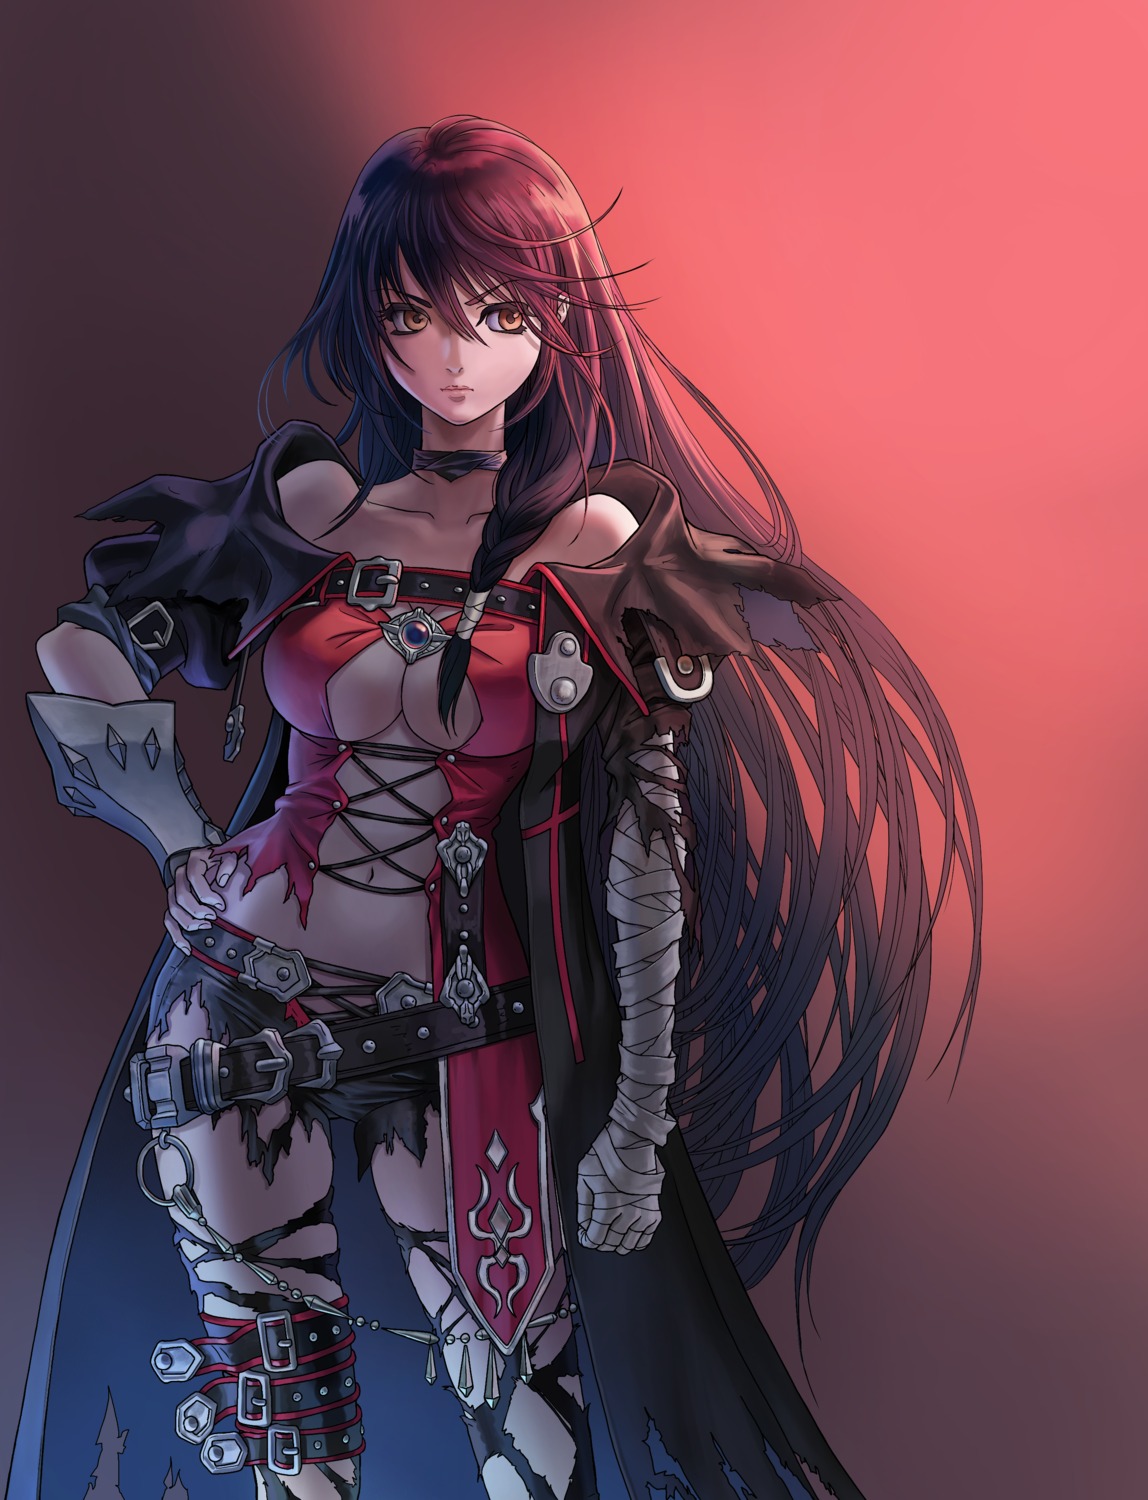 armor bandages cleavage komusubi no_bra tales_of tales_of_berseria thighhighs torn_clothes velvet_crowe